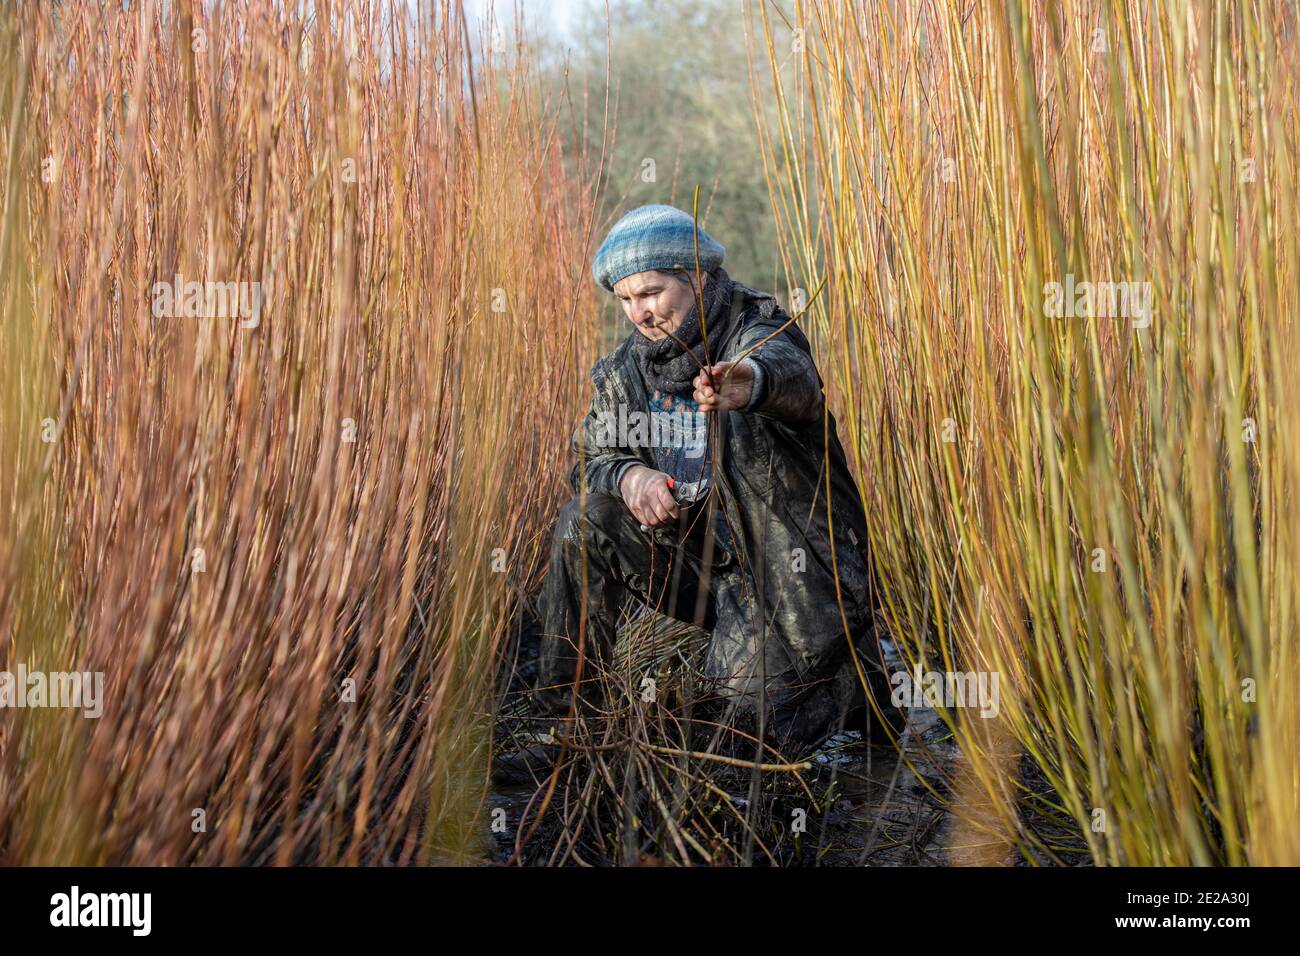 Annemarie O'Sullivan, basket-maker based in East Sussex, with her team harvesting willow in the outskirts of Horam village for basket making, England Stock Photo